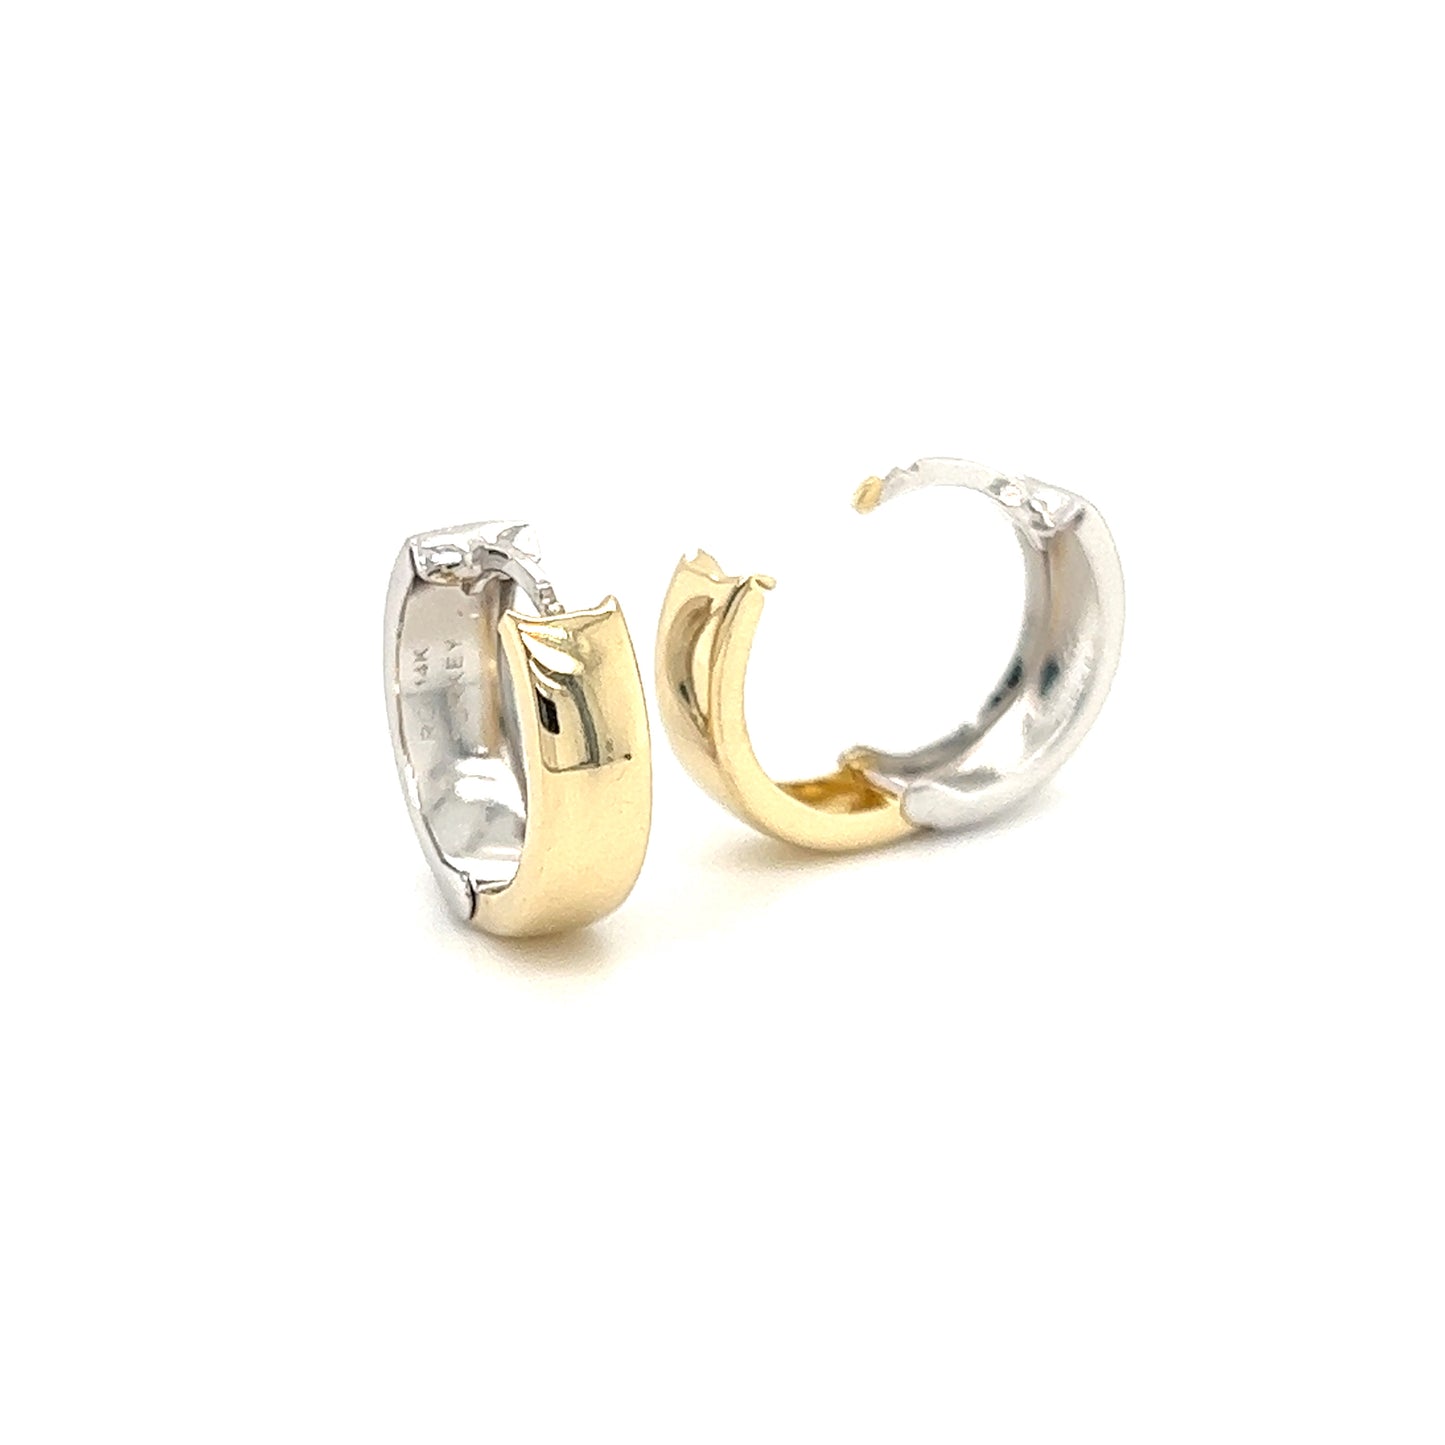 Reversible Hoop Earrings 4.7mm in 14K White and Yellow Gold Side View and Open View